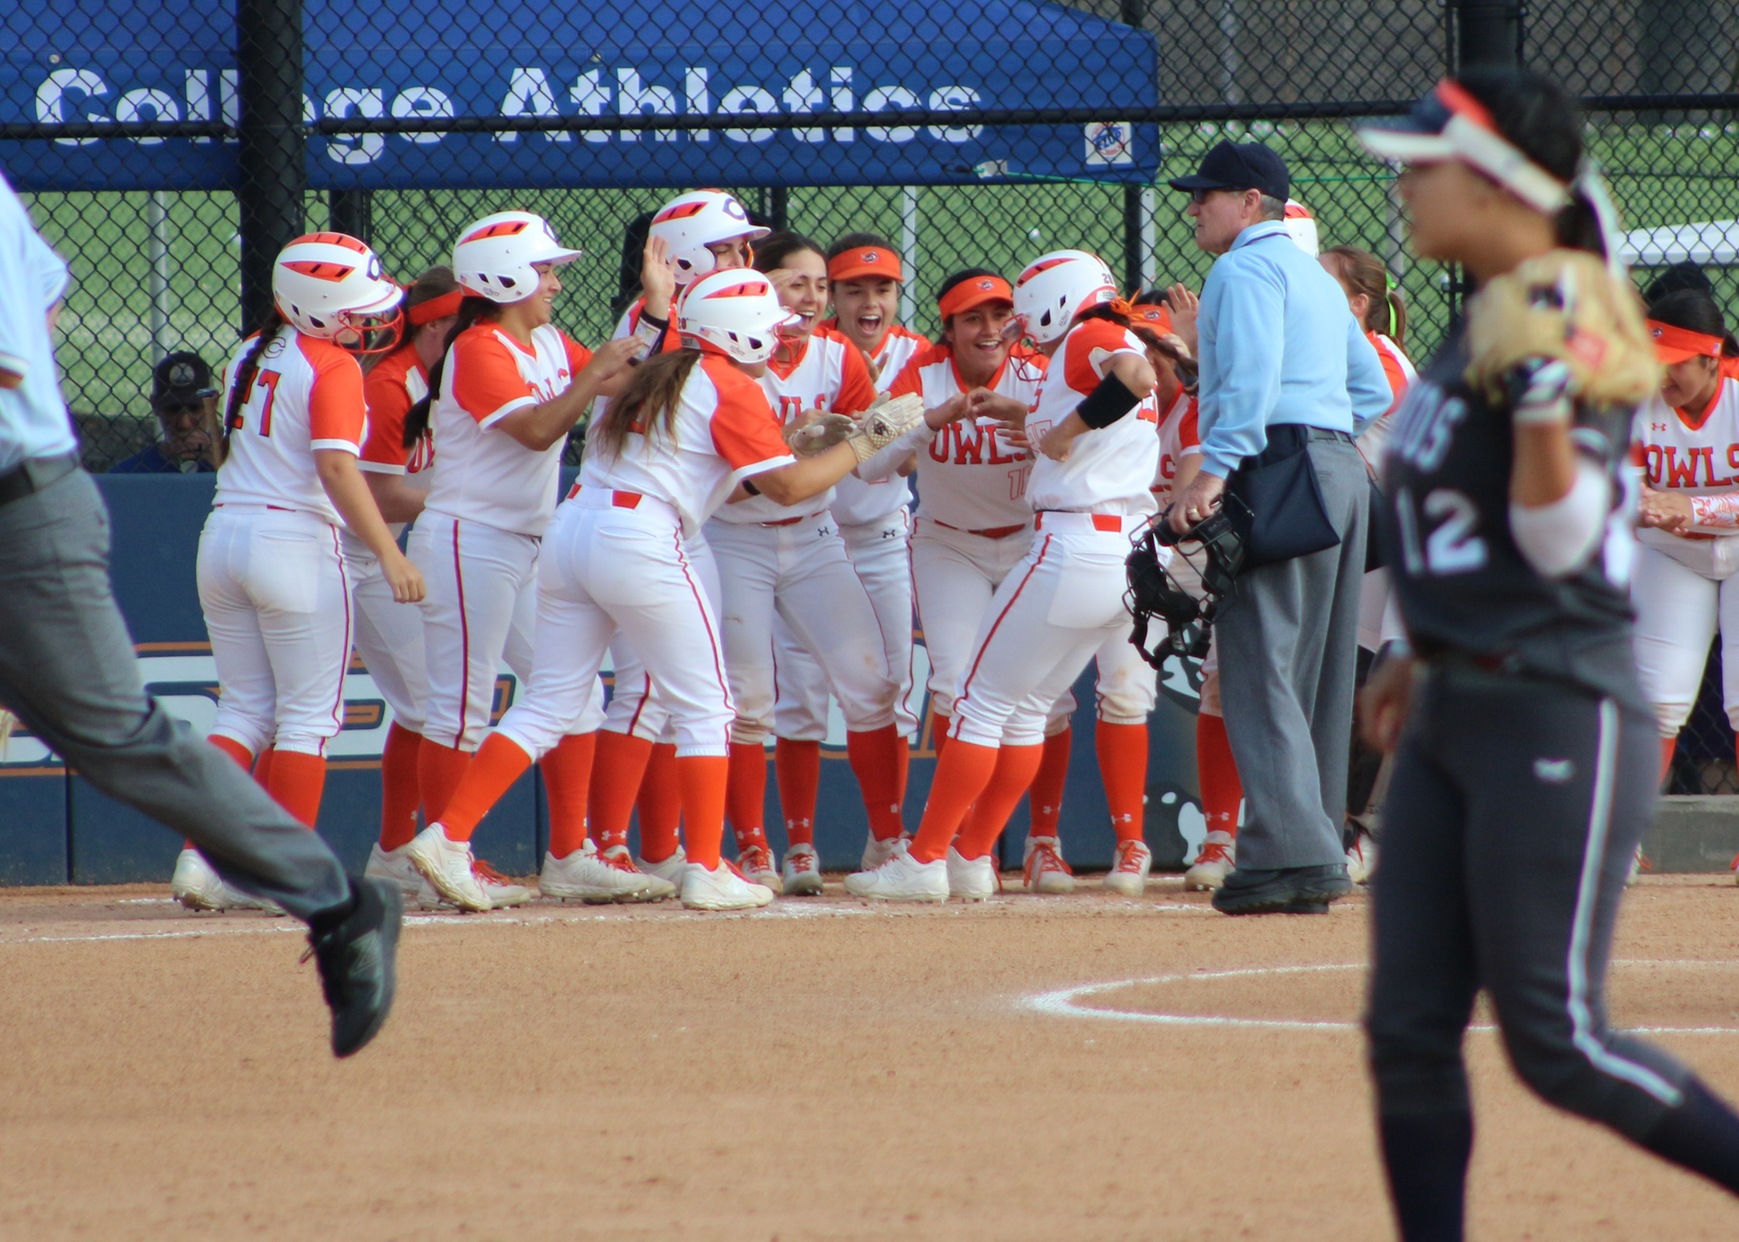 Alexis Acosta crosses home plate, much to the pleasure of her teammates. Image: Treyvon Watts-Hale